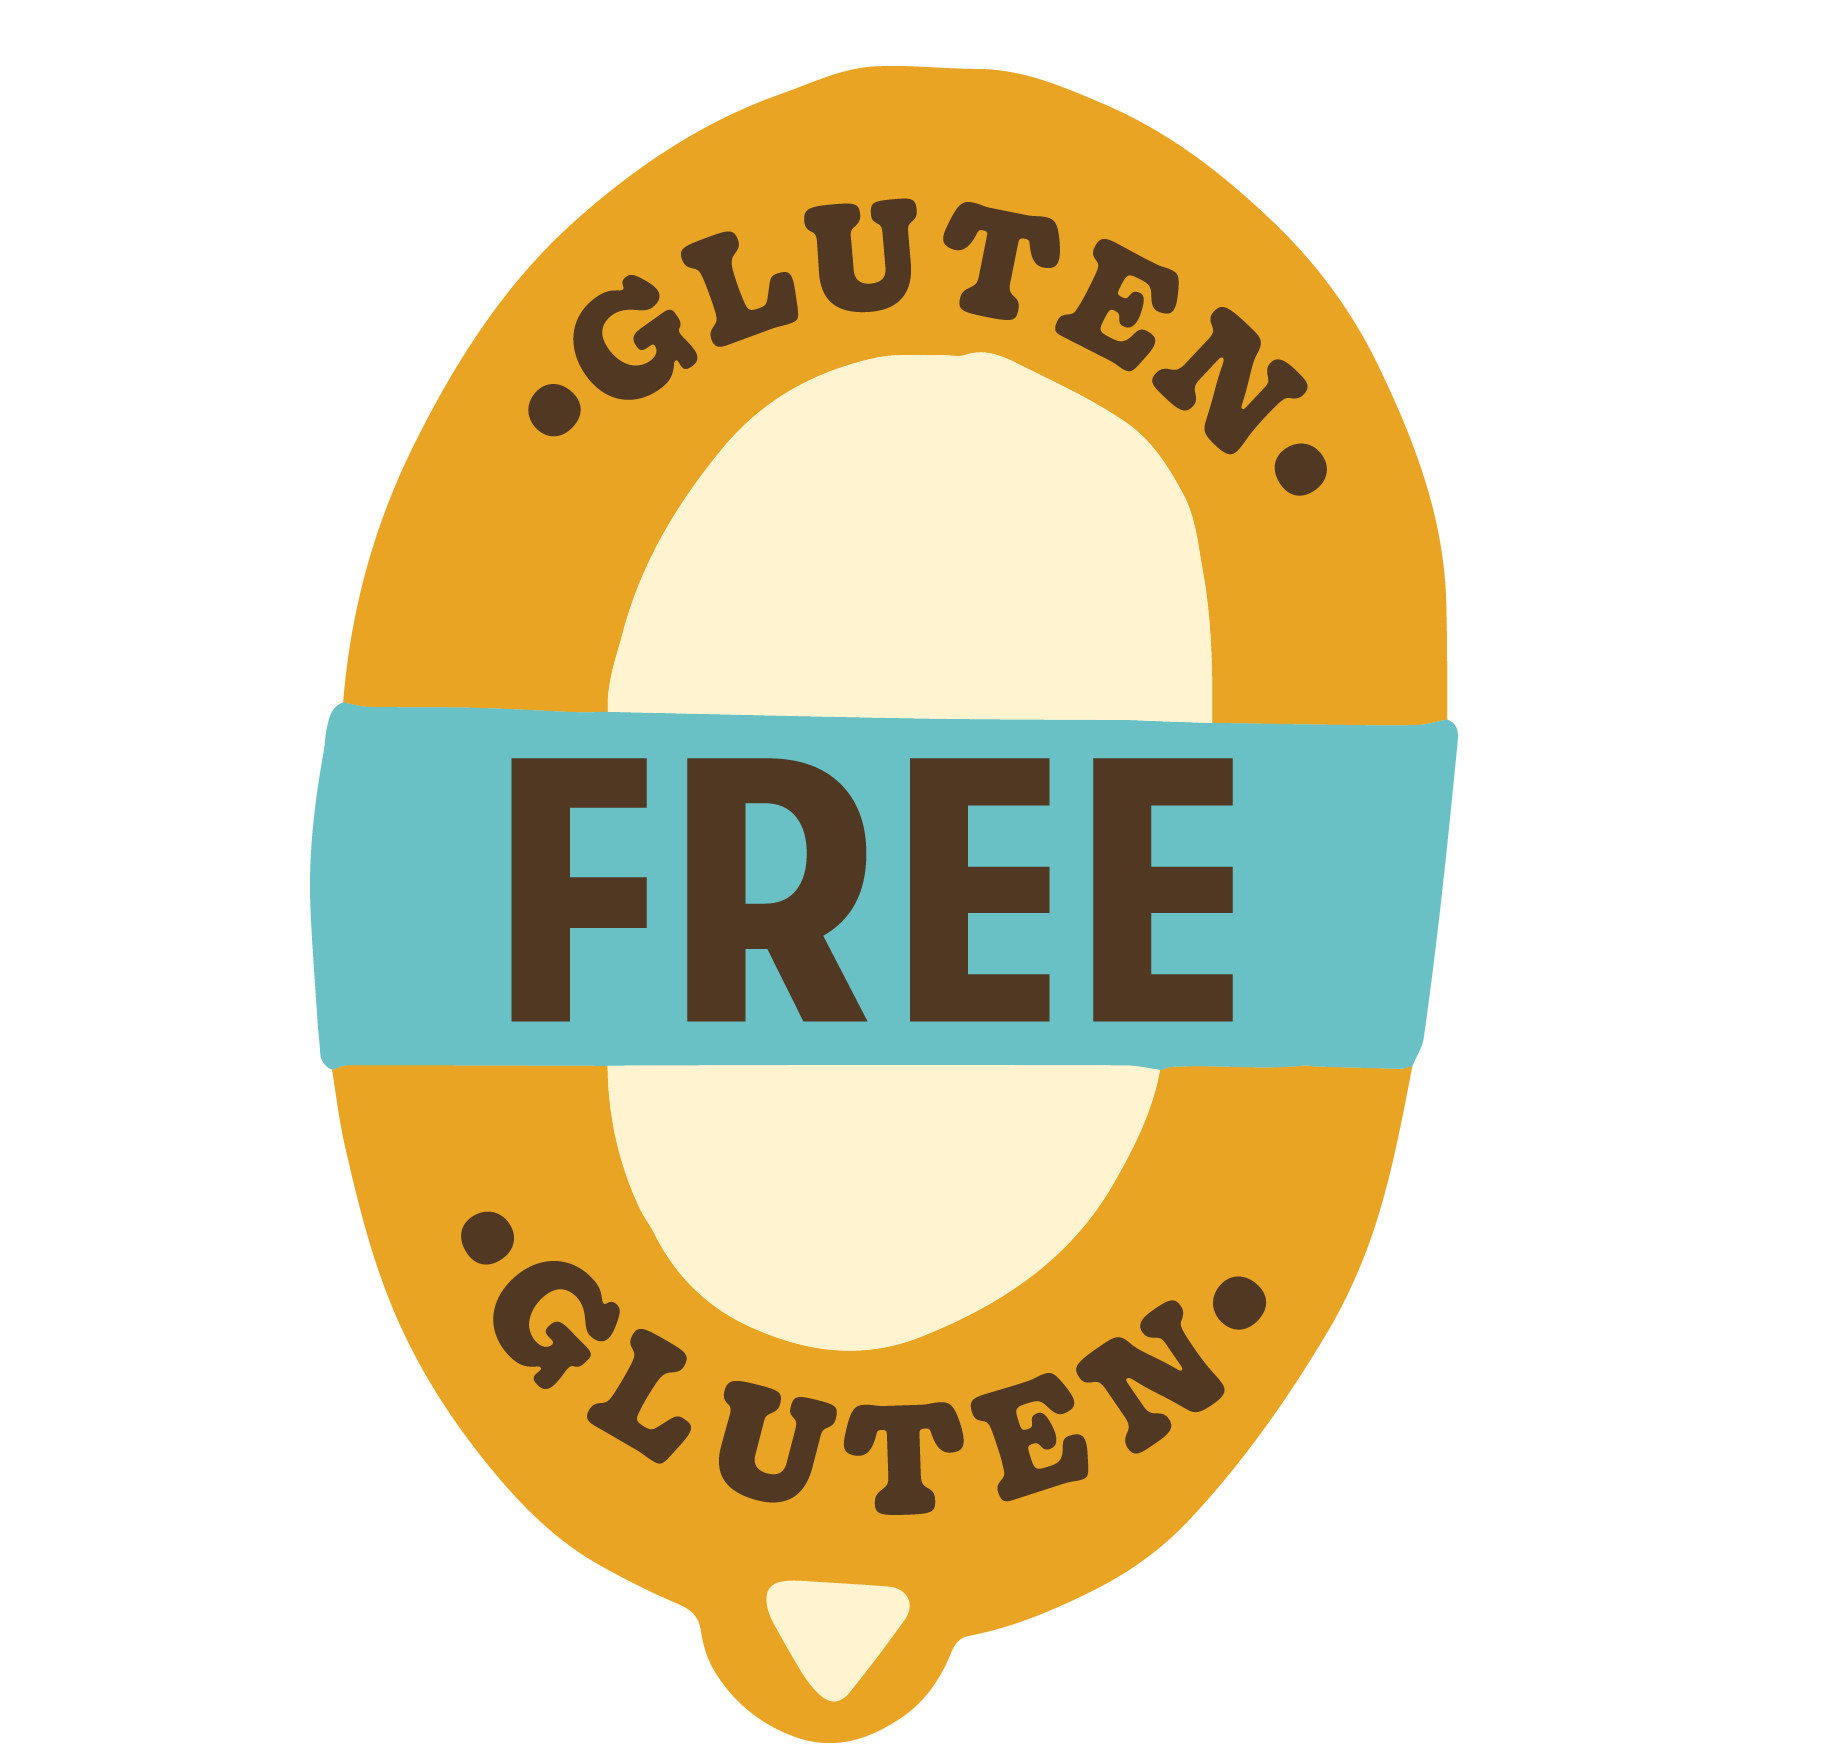 Gluten Free graphic. Graphic is a yellow oval with light yellow center and blue banner going straight through center.